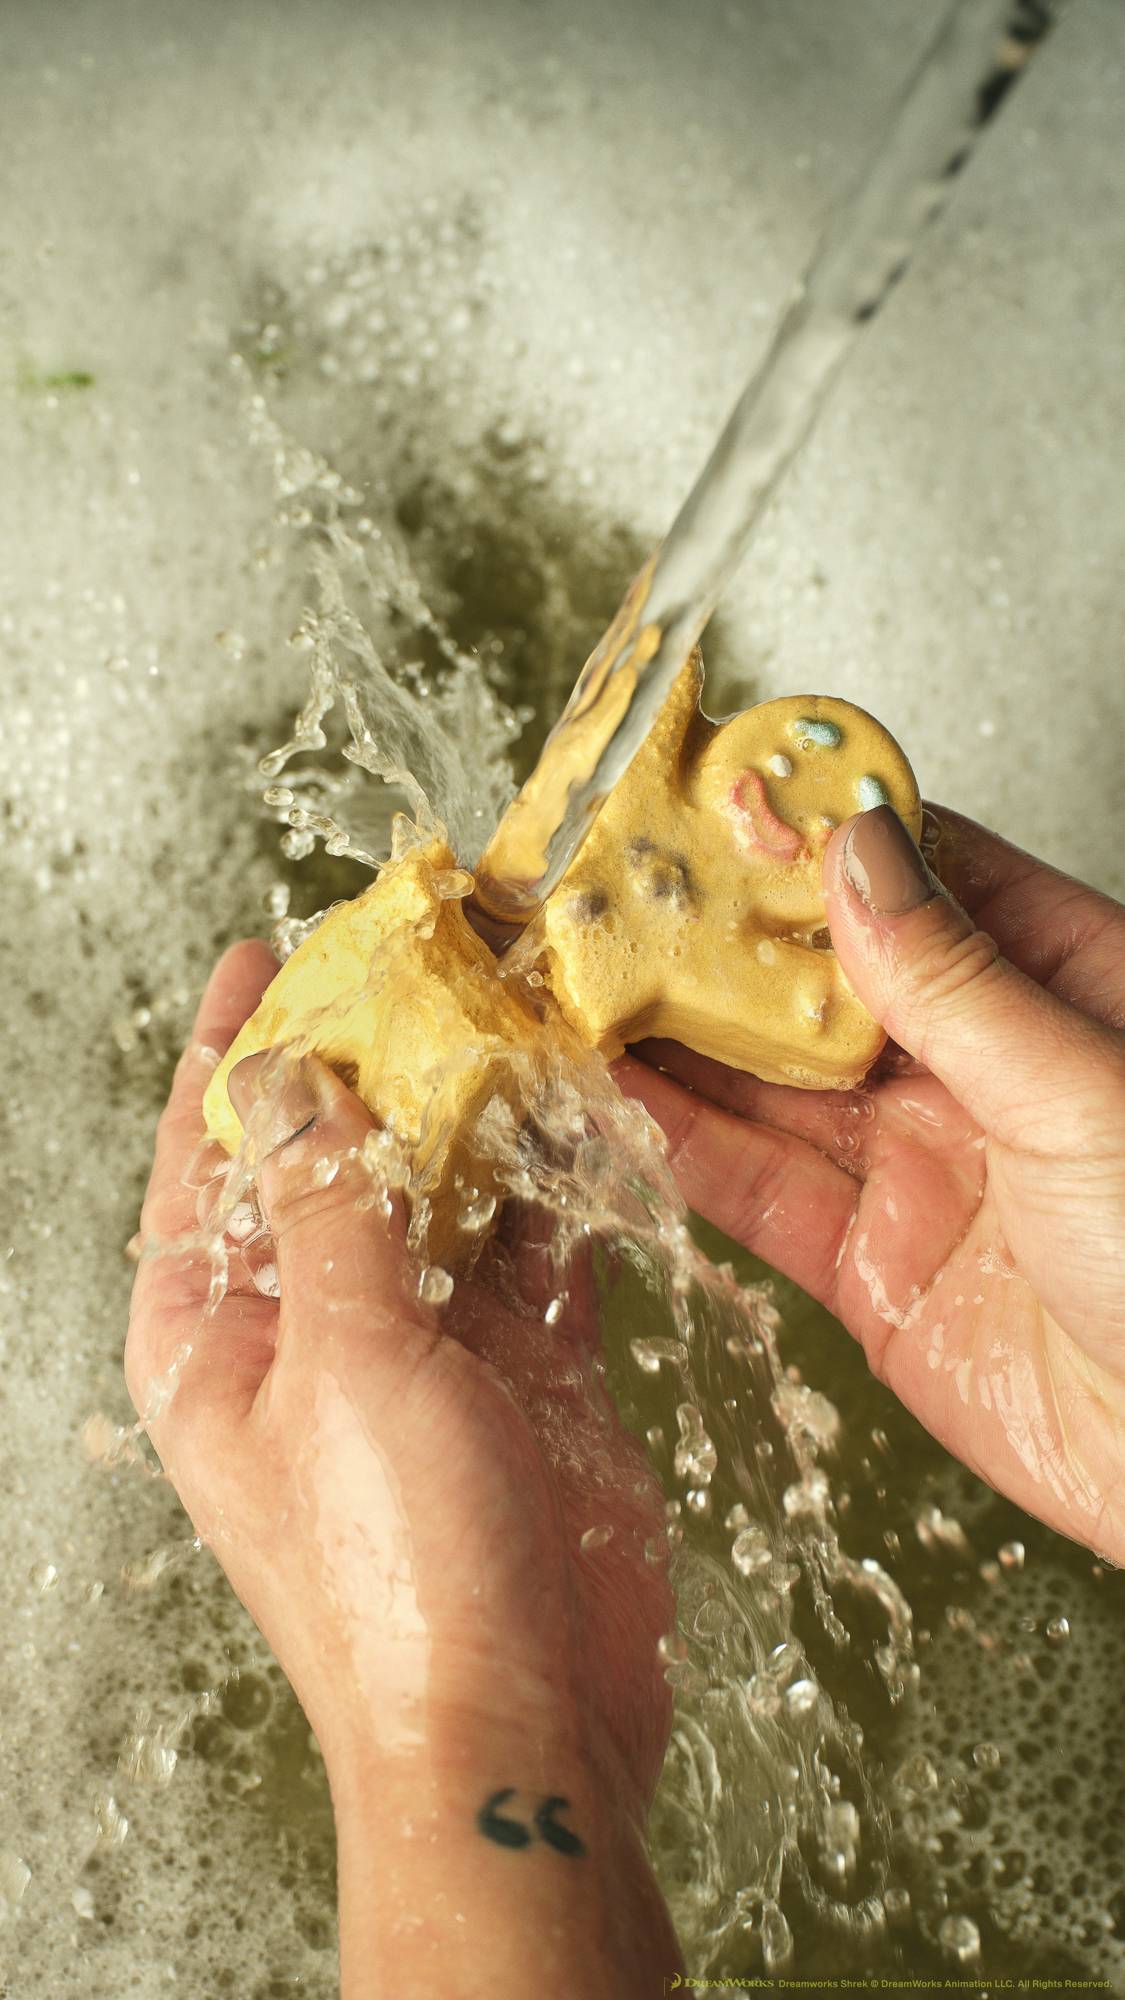 A close-up of the model's hands as they break the Gingy bubble bar in half and hold it under running tap water to create mountains of bubbles below. 